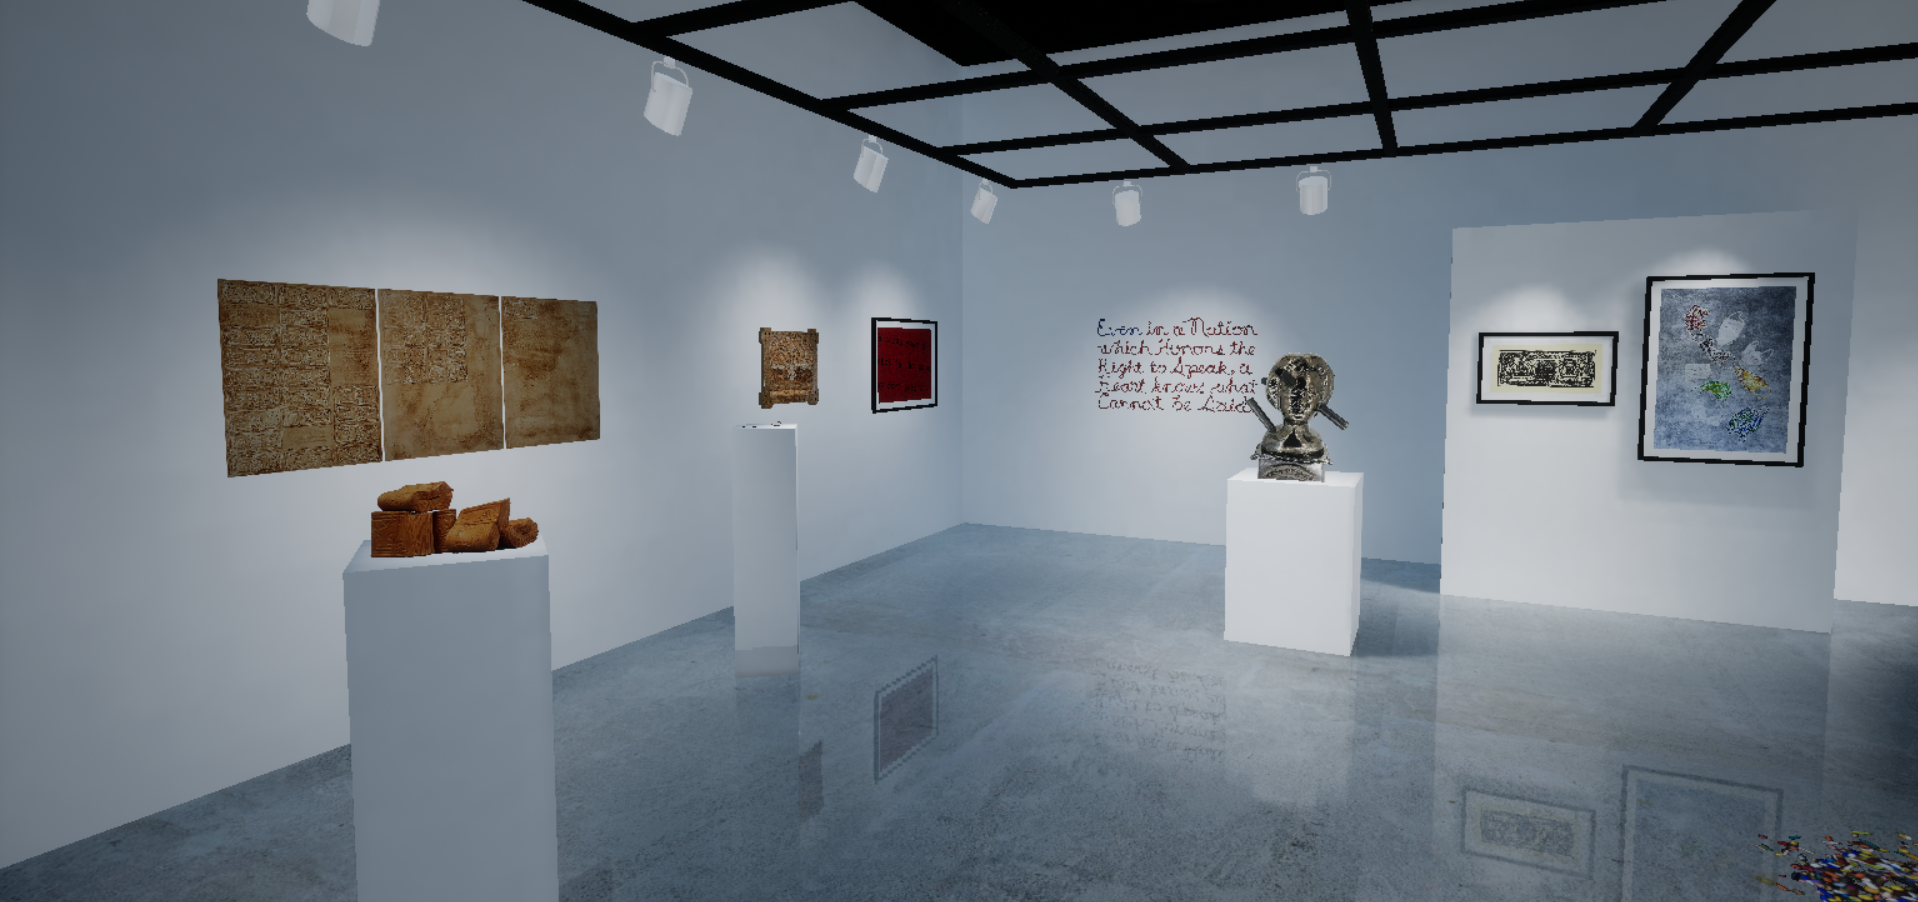 Installation View, Back Gallery, "Ink & Clay 45" Virtual Exhibition